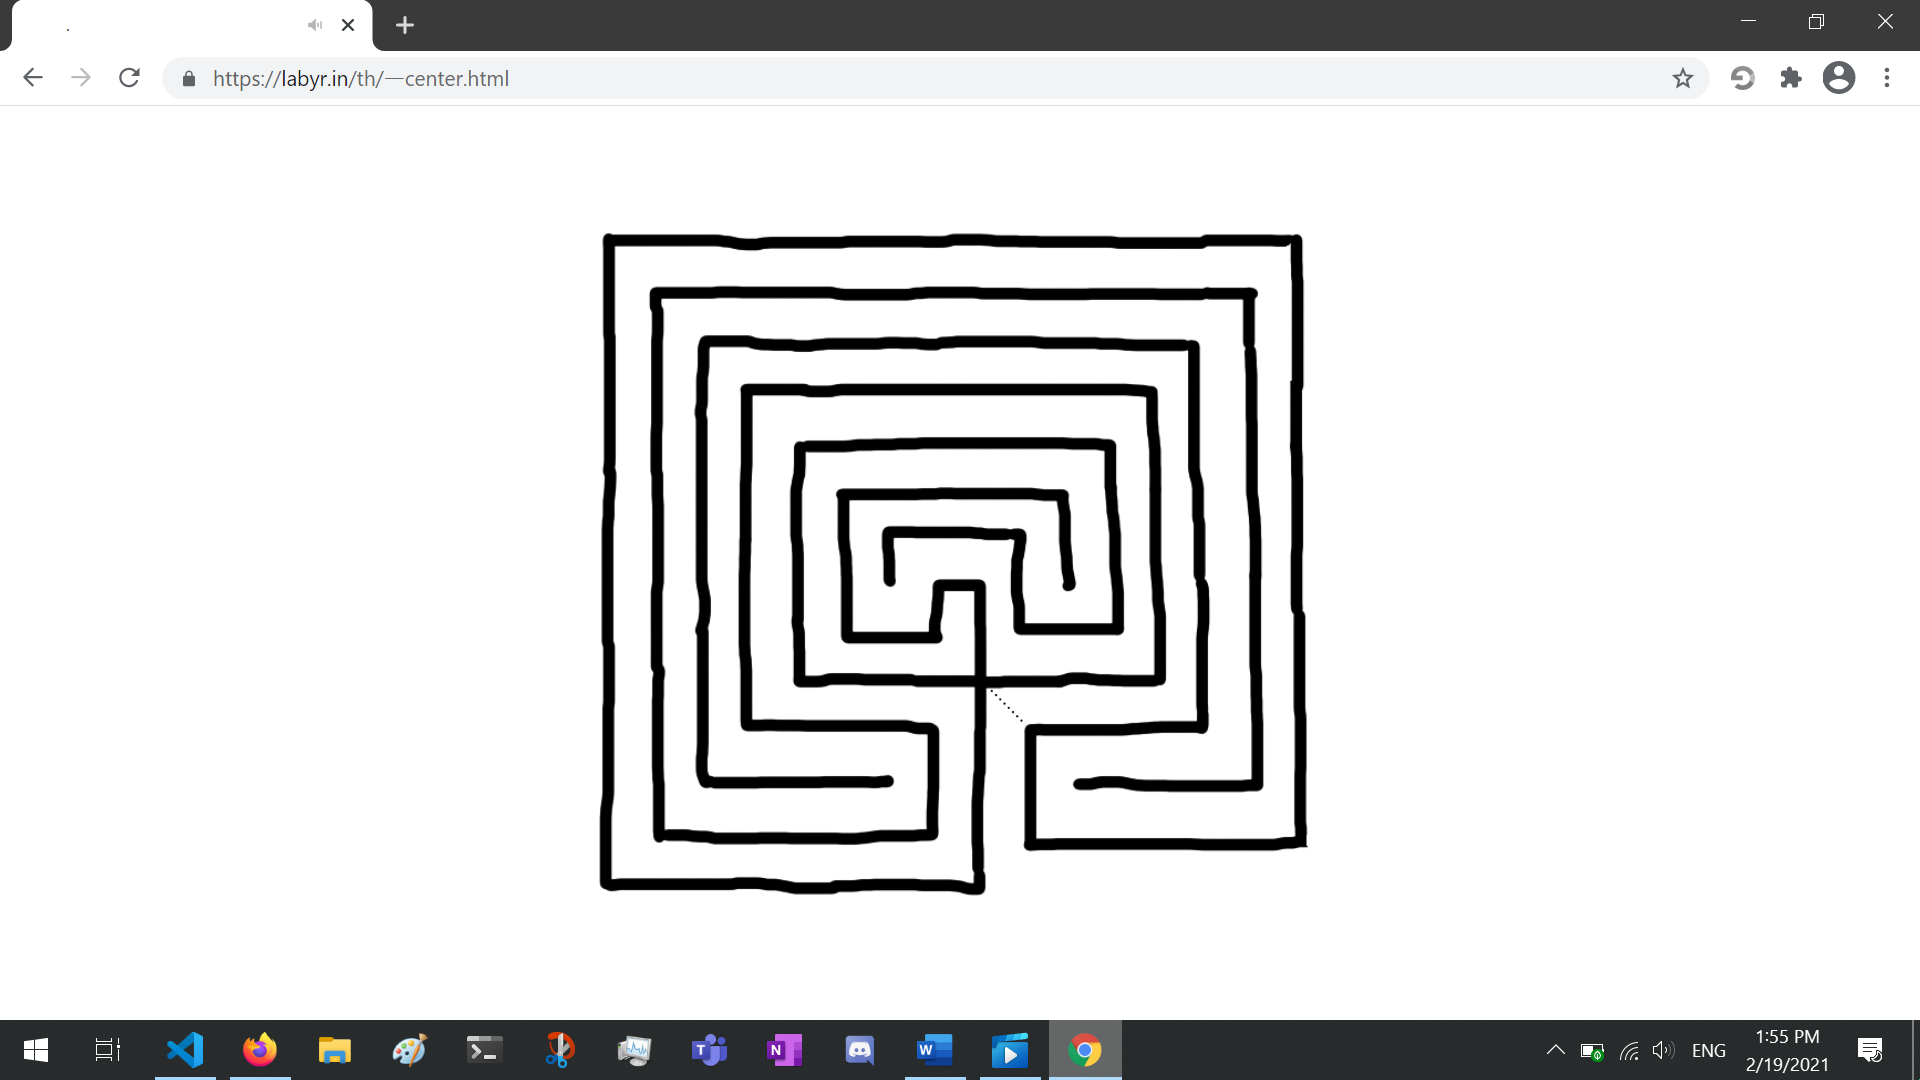 An image of the classical labyrinth, drawn using paint with square corners.